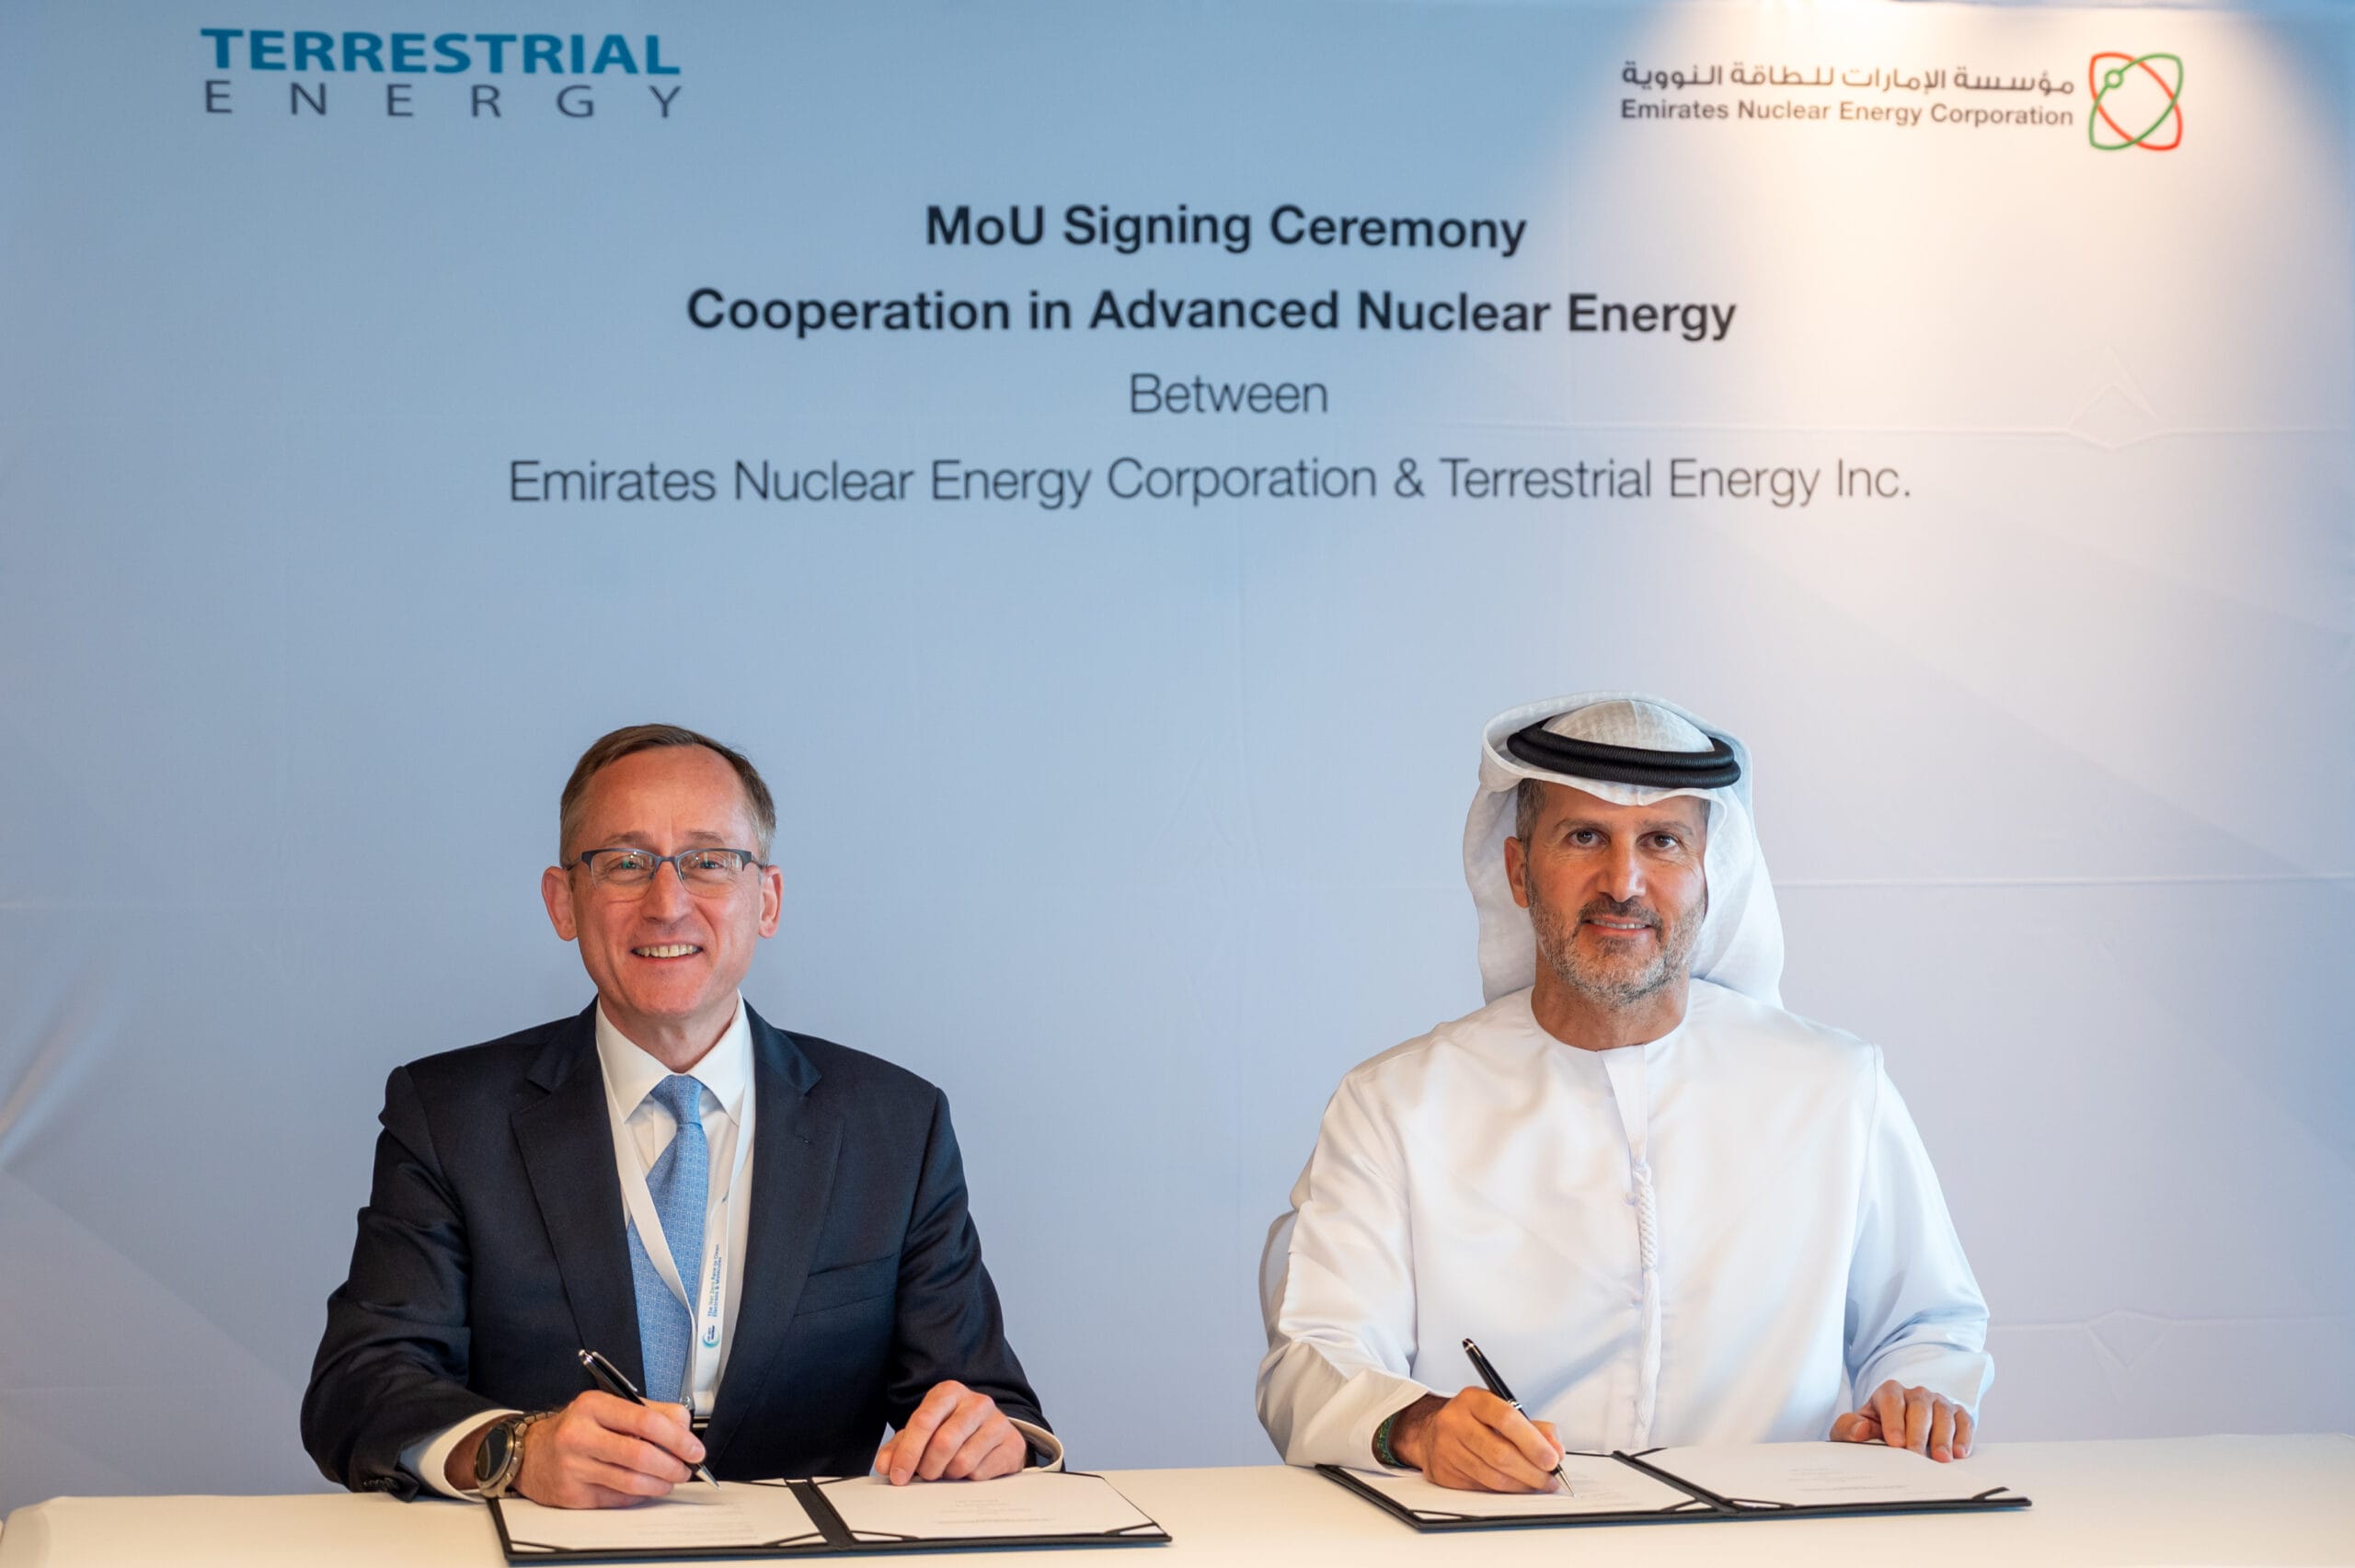 Image of Mohamed Al Hammadi, Managing Director and Chief Executive Officer of ENEC and Simon Irish, Chief Executive Officer of Terrestrial Energy